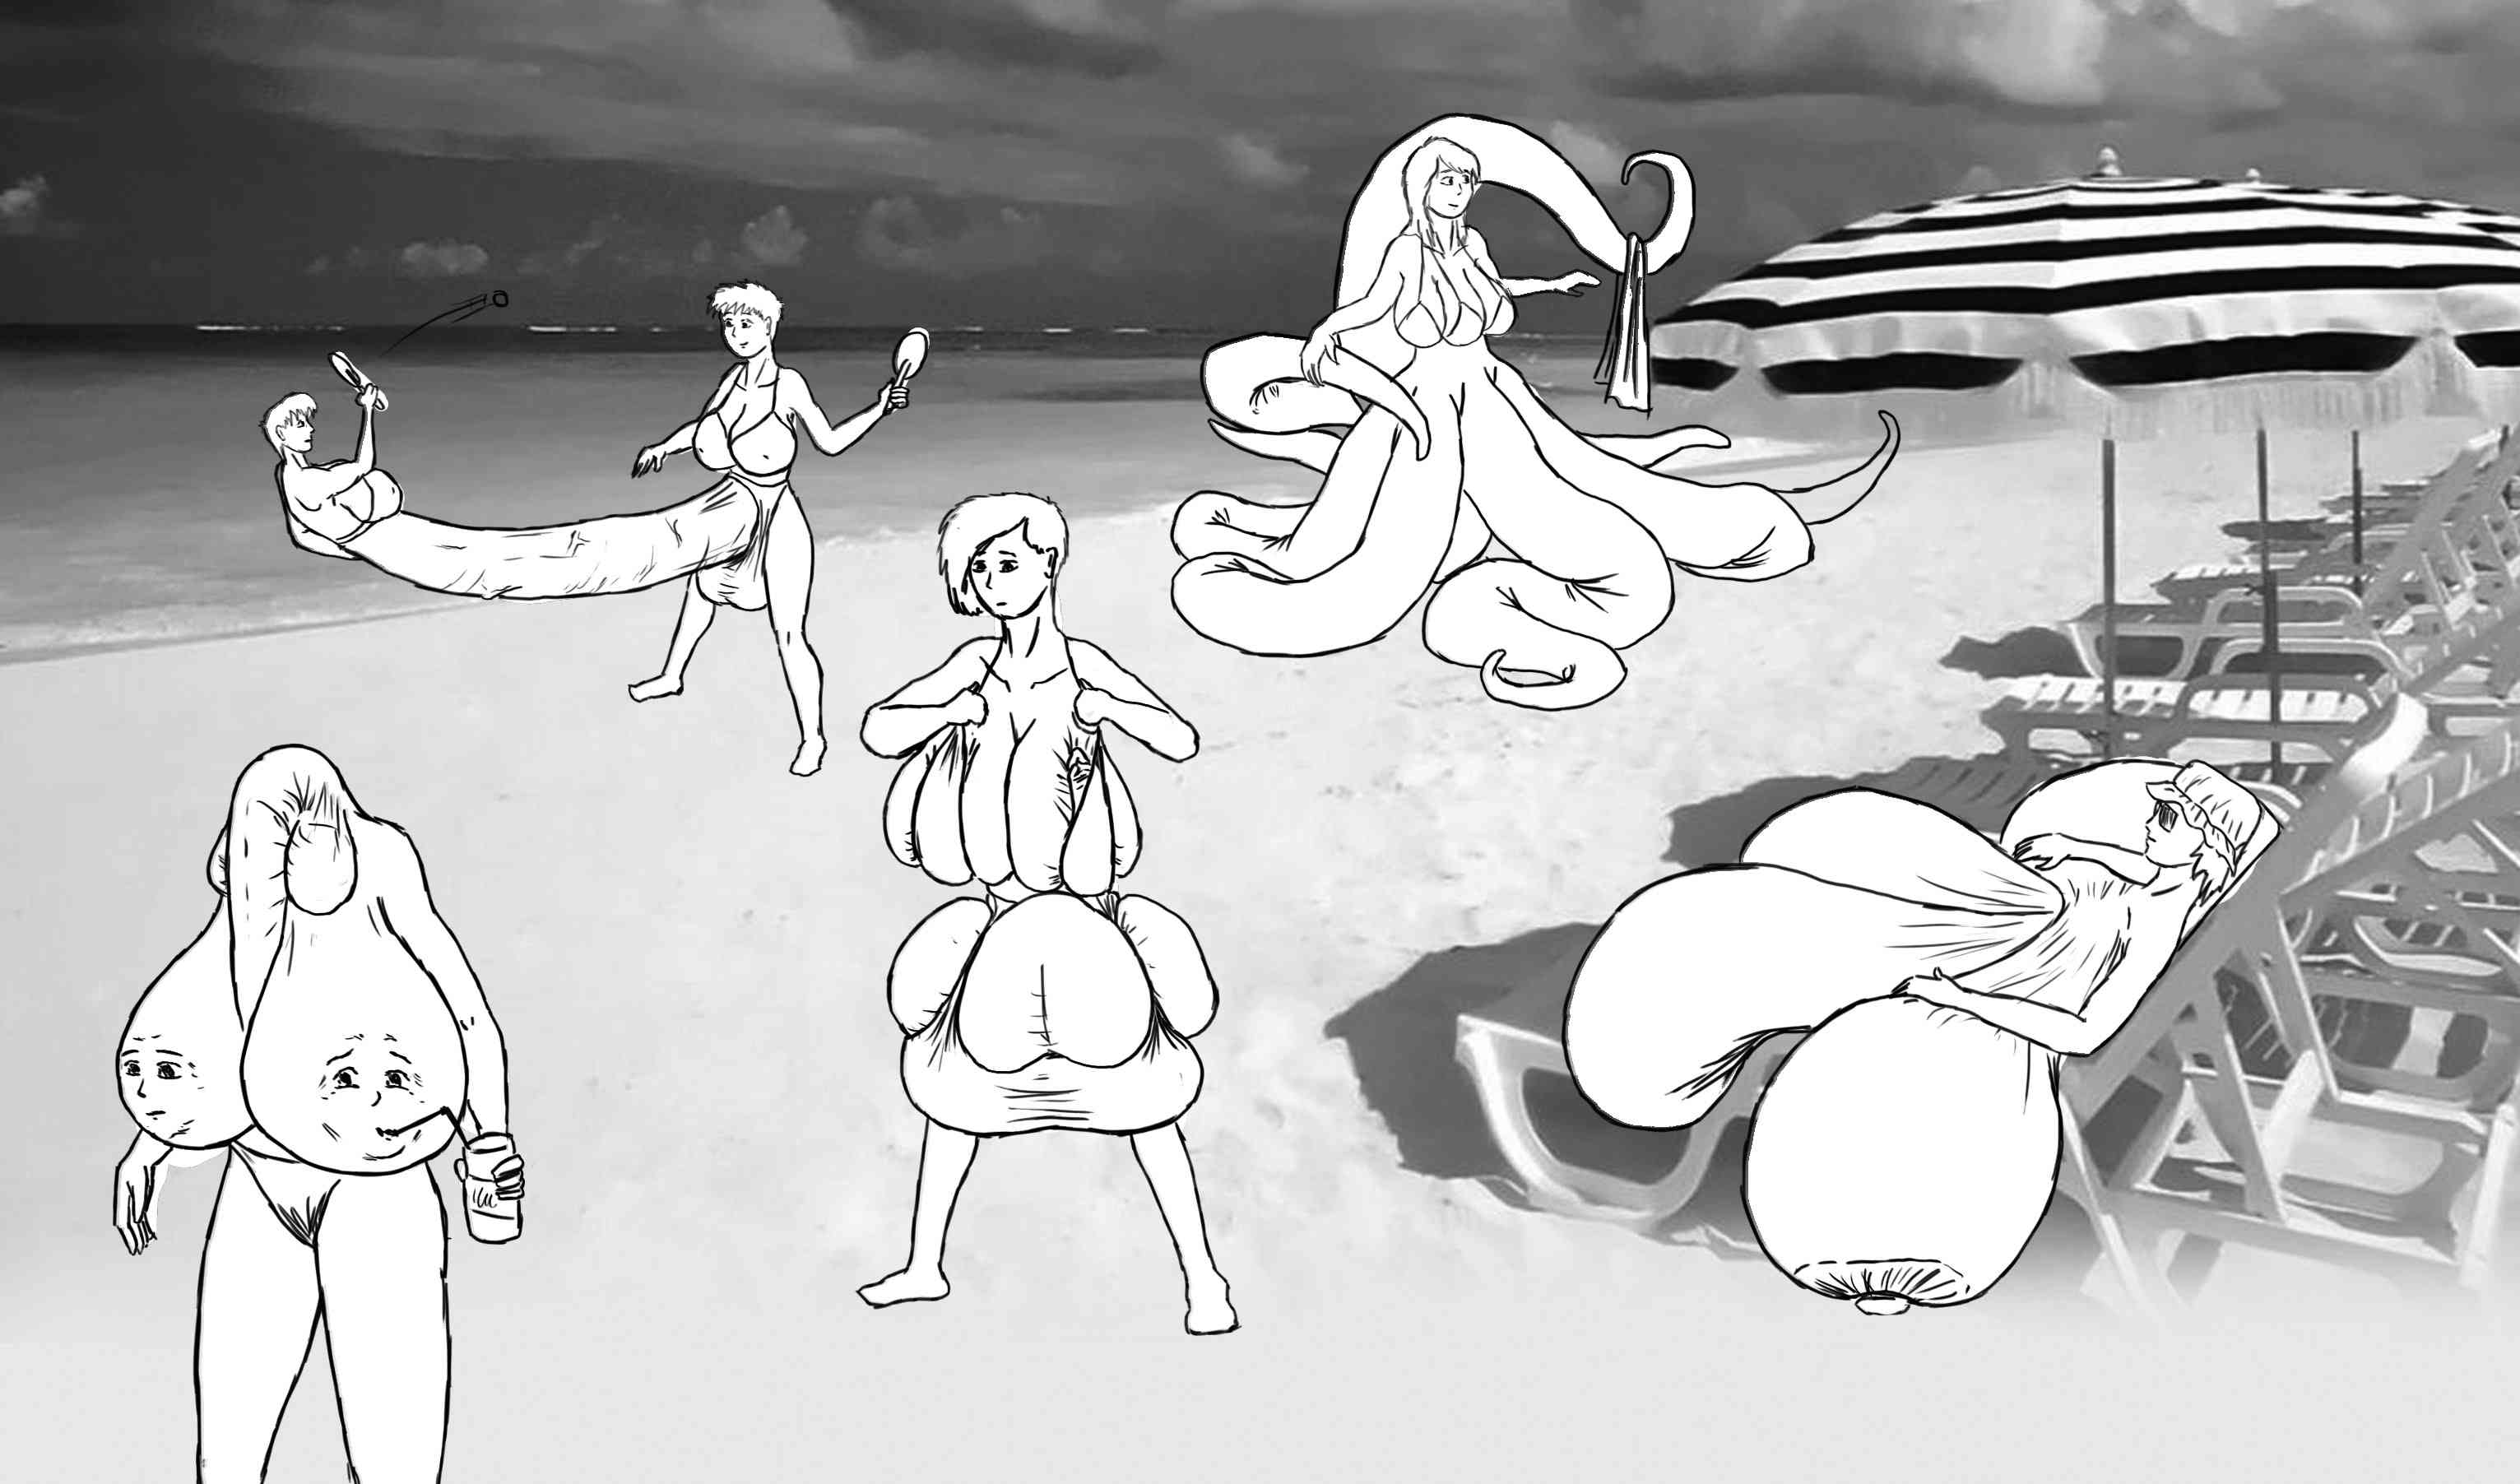 Mike, Lindy, Larissa, and Dani at the beach, along with 2 new characters about to be introduced